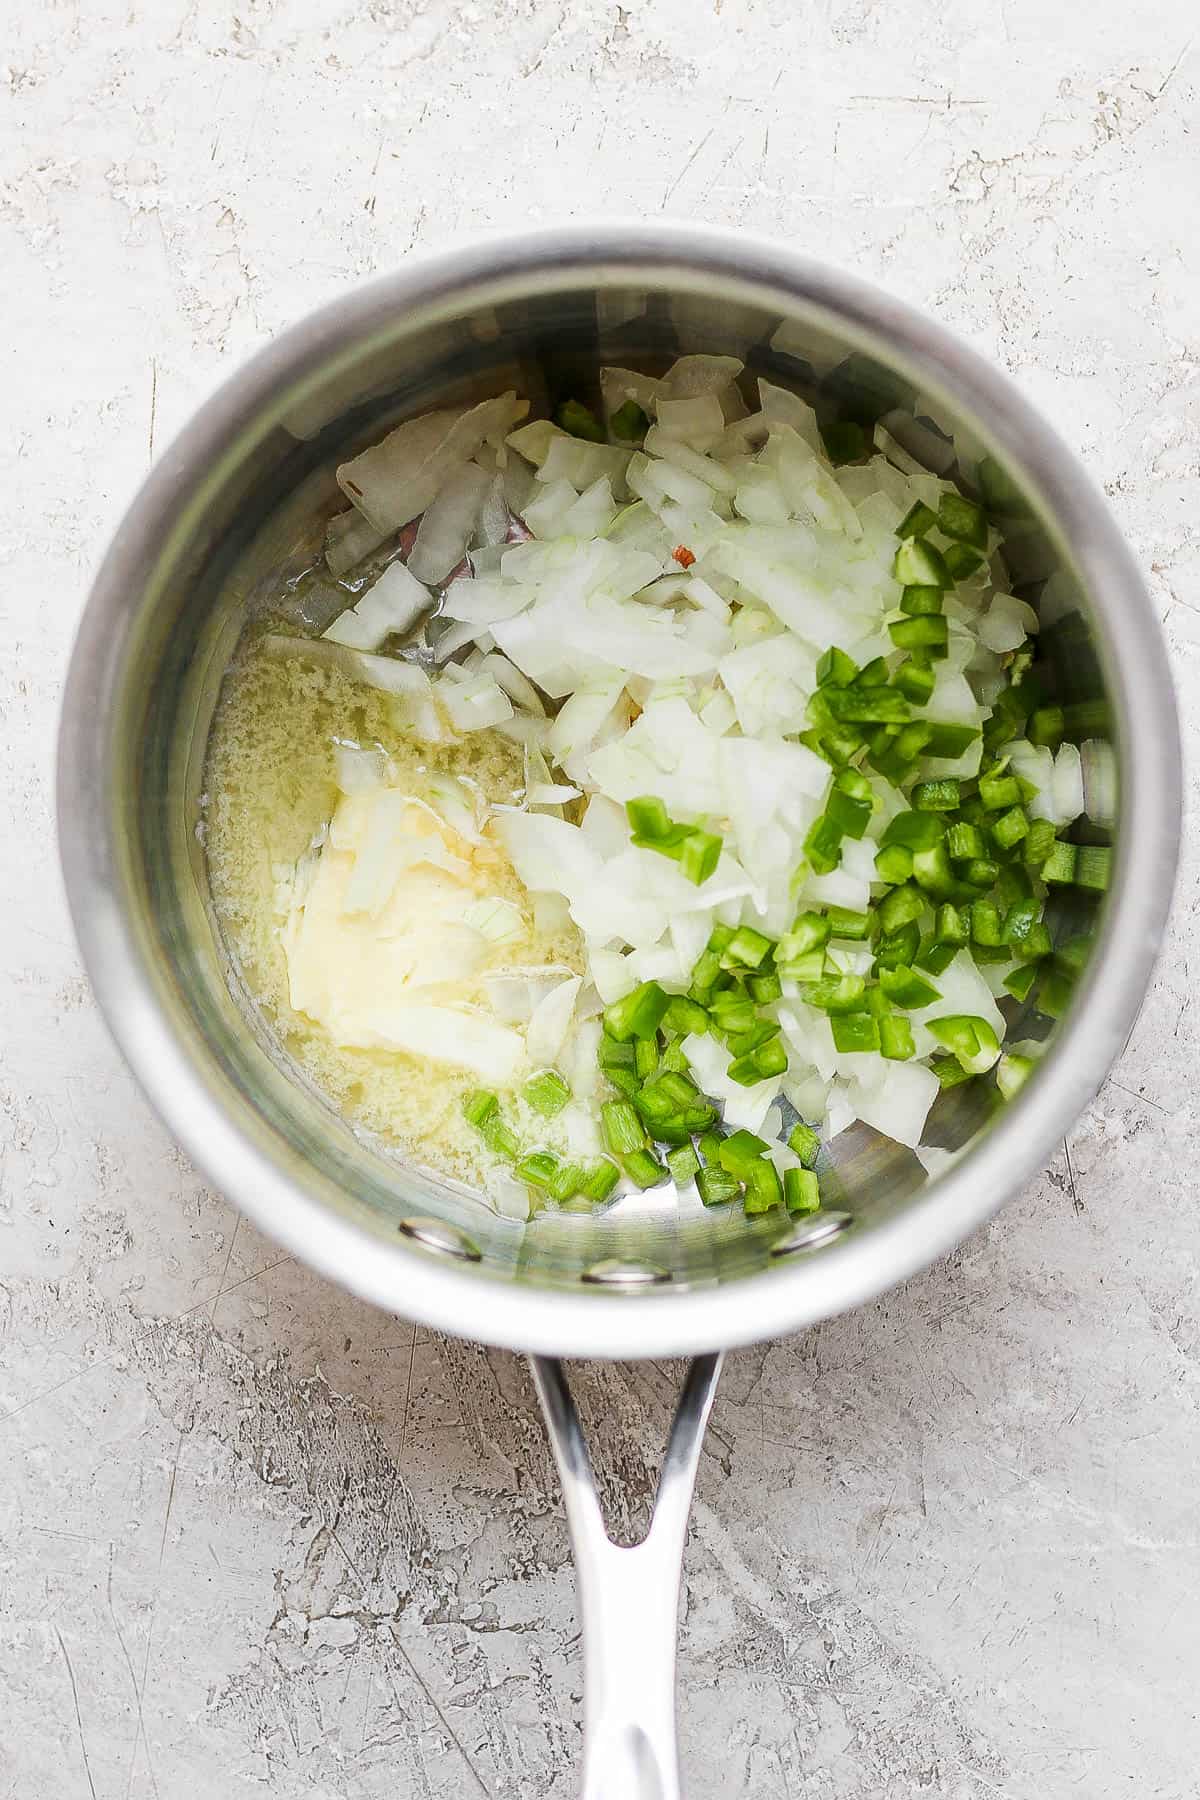 Butter melted in a saucepan with onion, garlic, and jalapeno added to the pot.